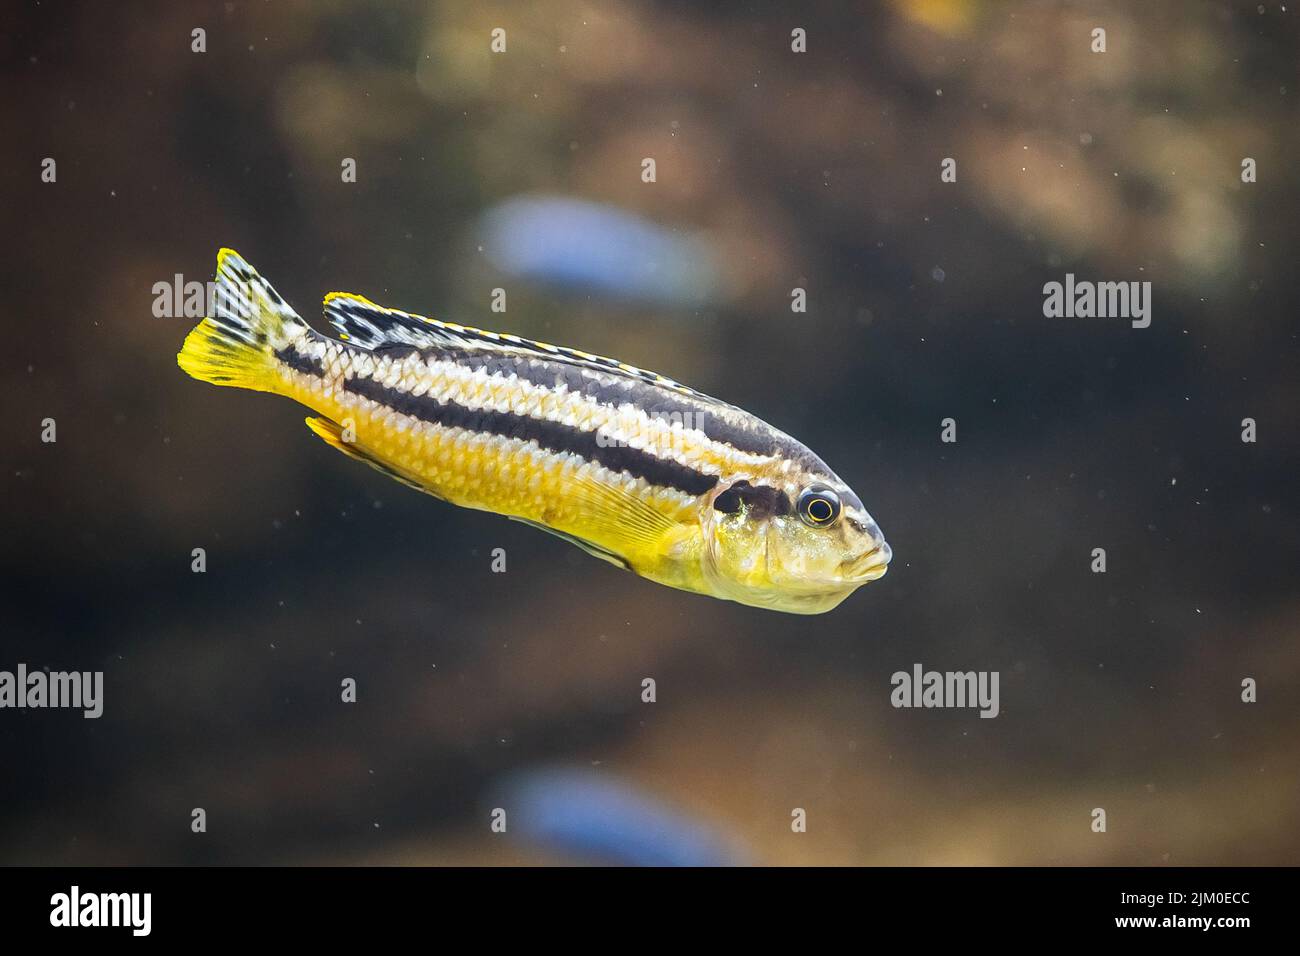 A closeup shot of an African cichlid fish swimming underwater in Malawi Lake Stock Photo